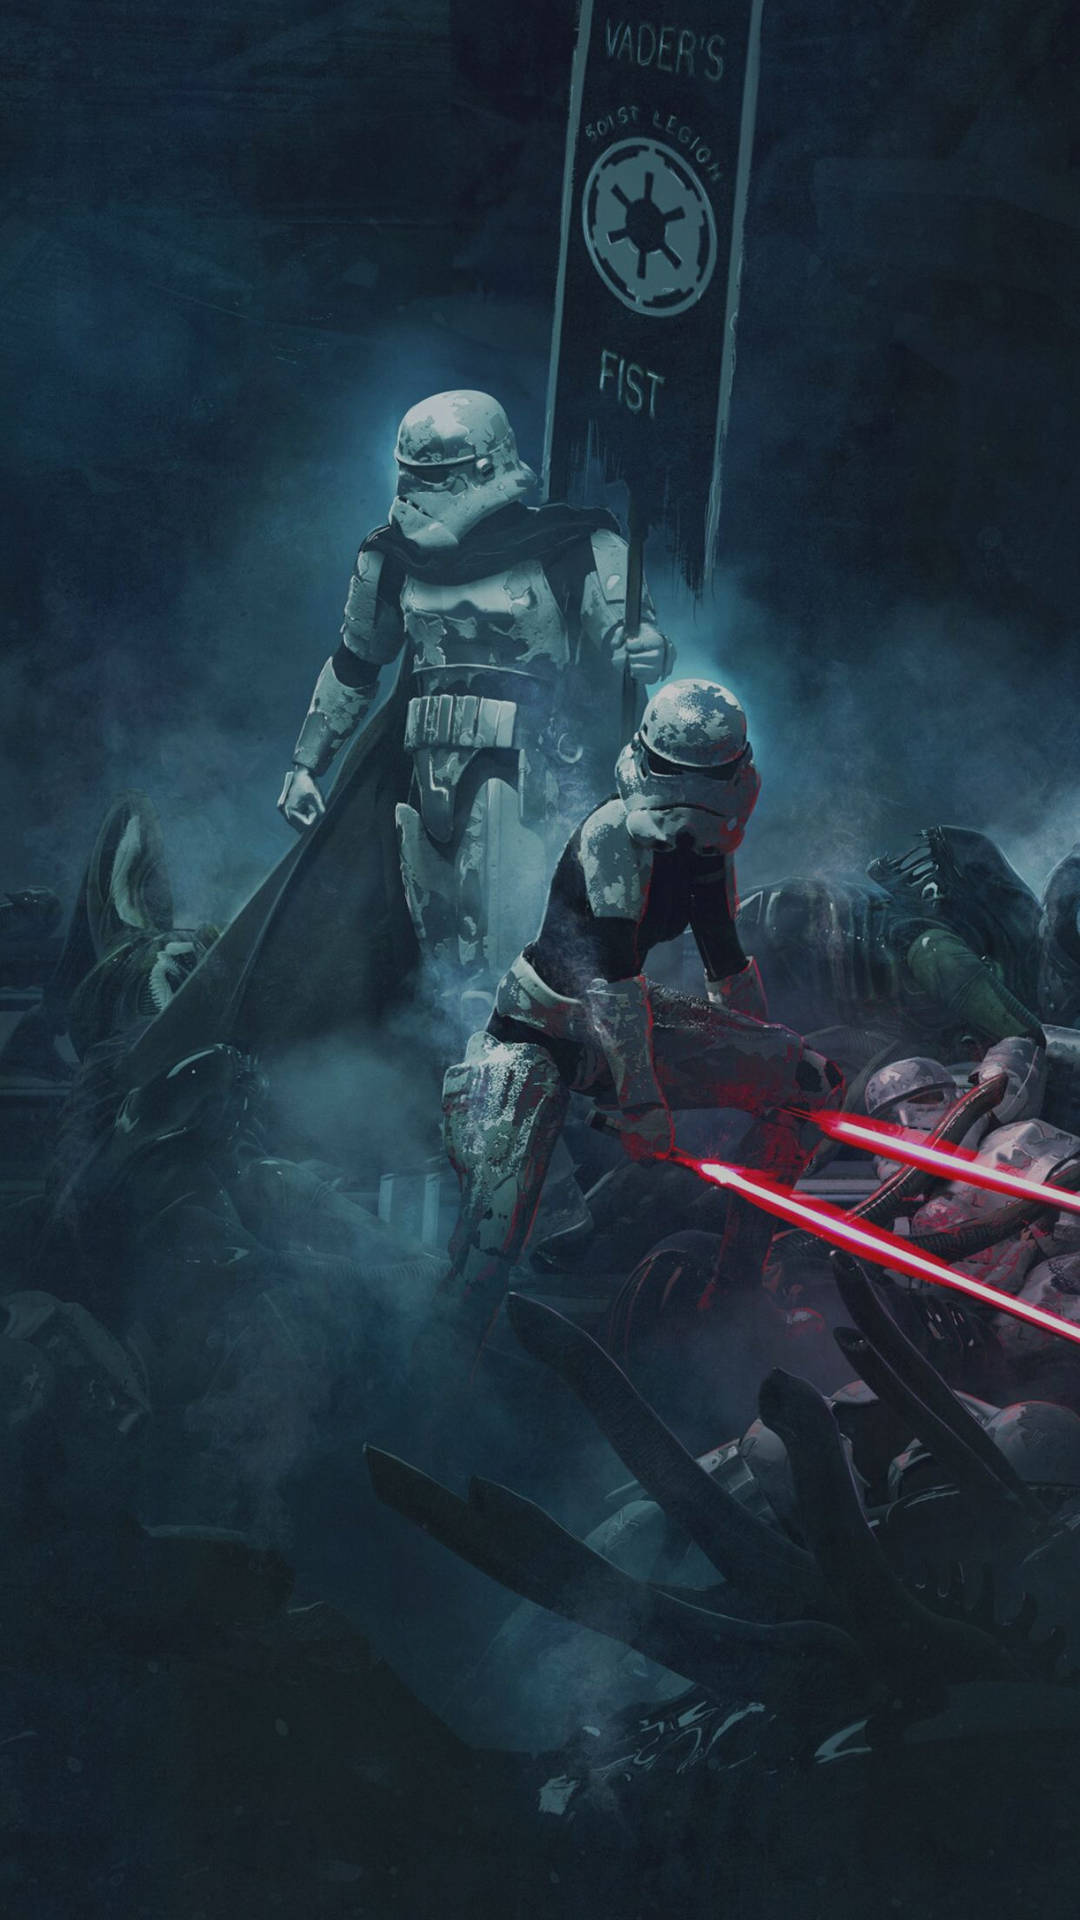 Stormtroopers Wielding Lightsabers Background